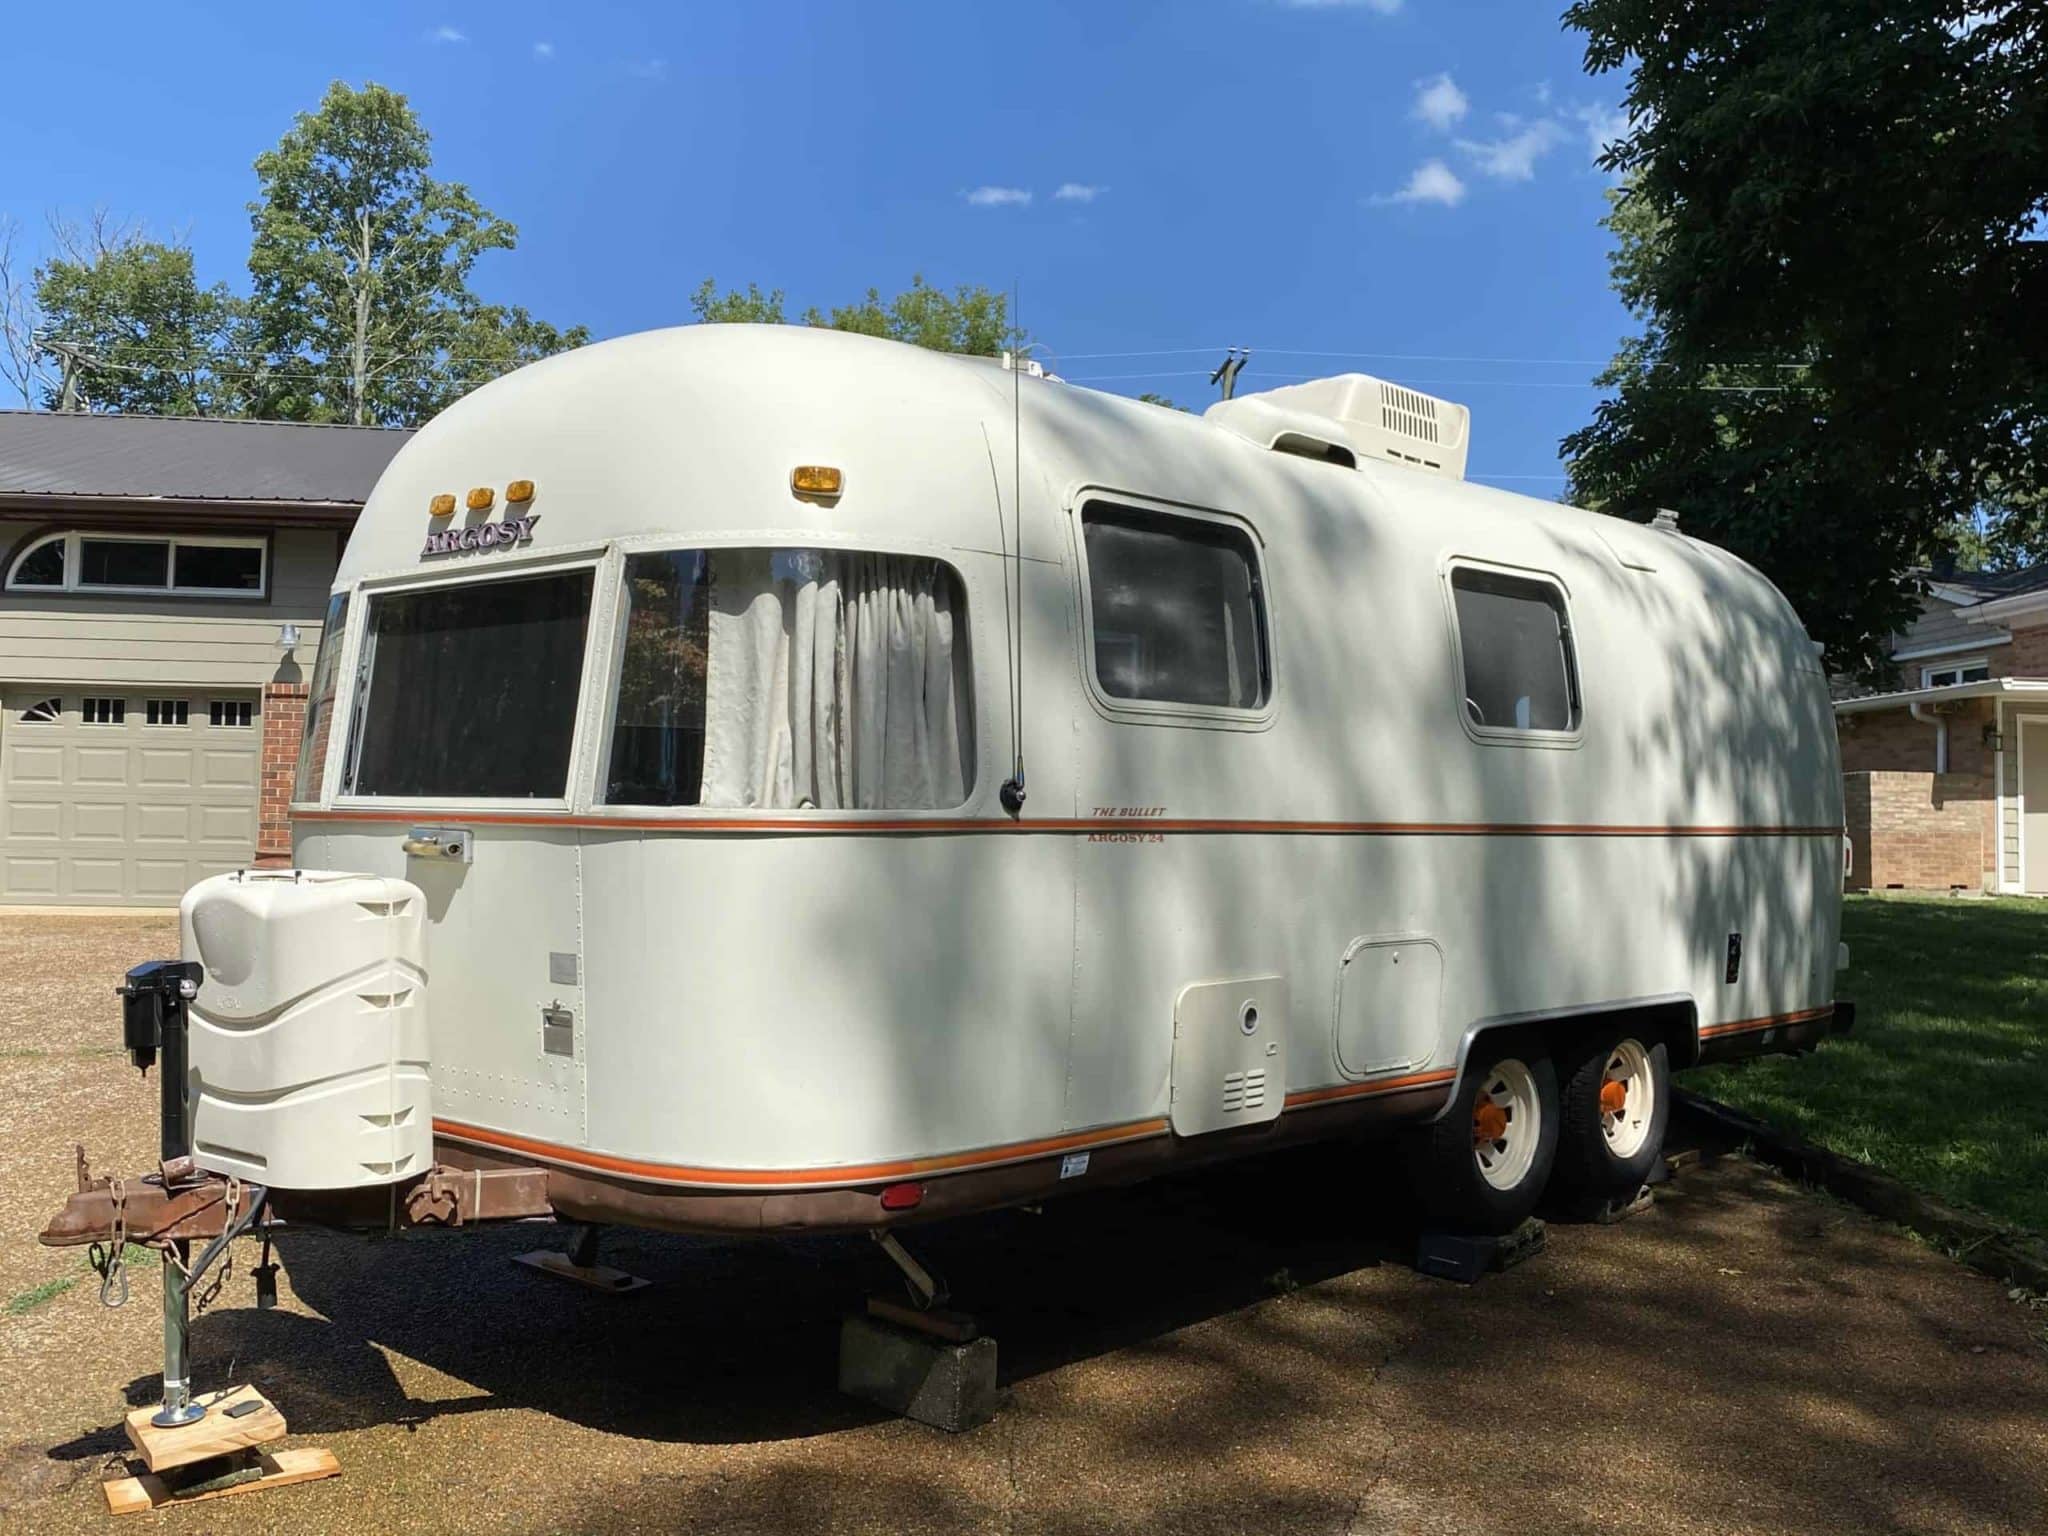 1977 Airstream 24FT Argosy Travel Trailers For Sale in Nashville